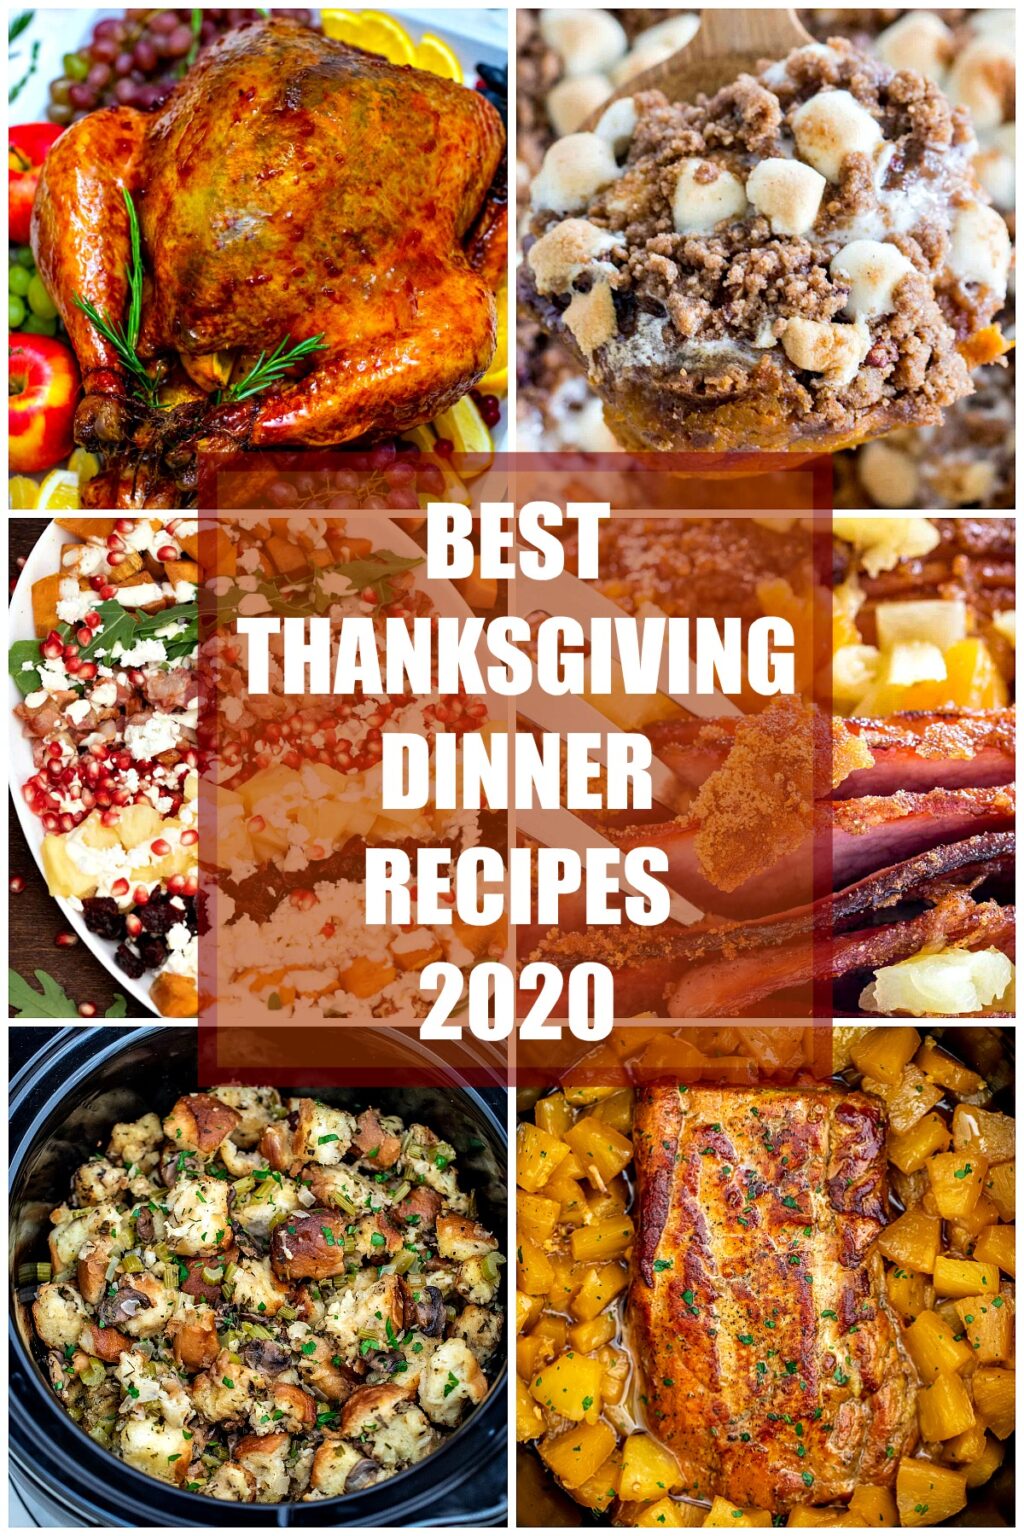 Best Thanksgiving dinner recipes 2020 - Sweet and Savory Meals